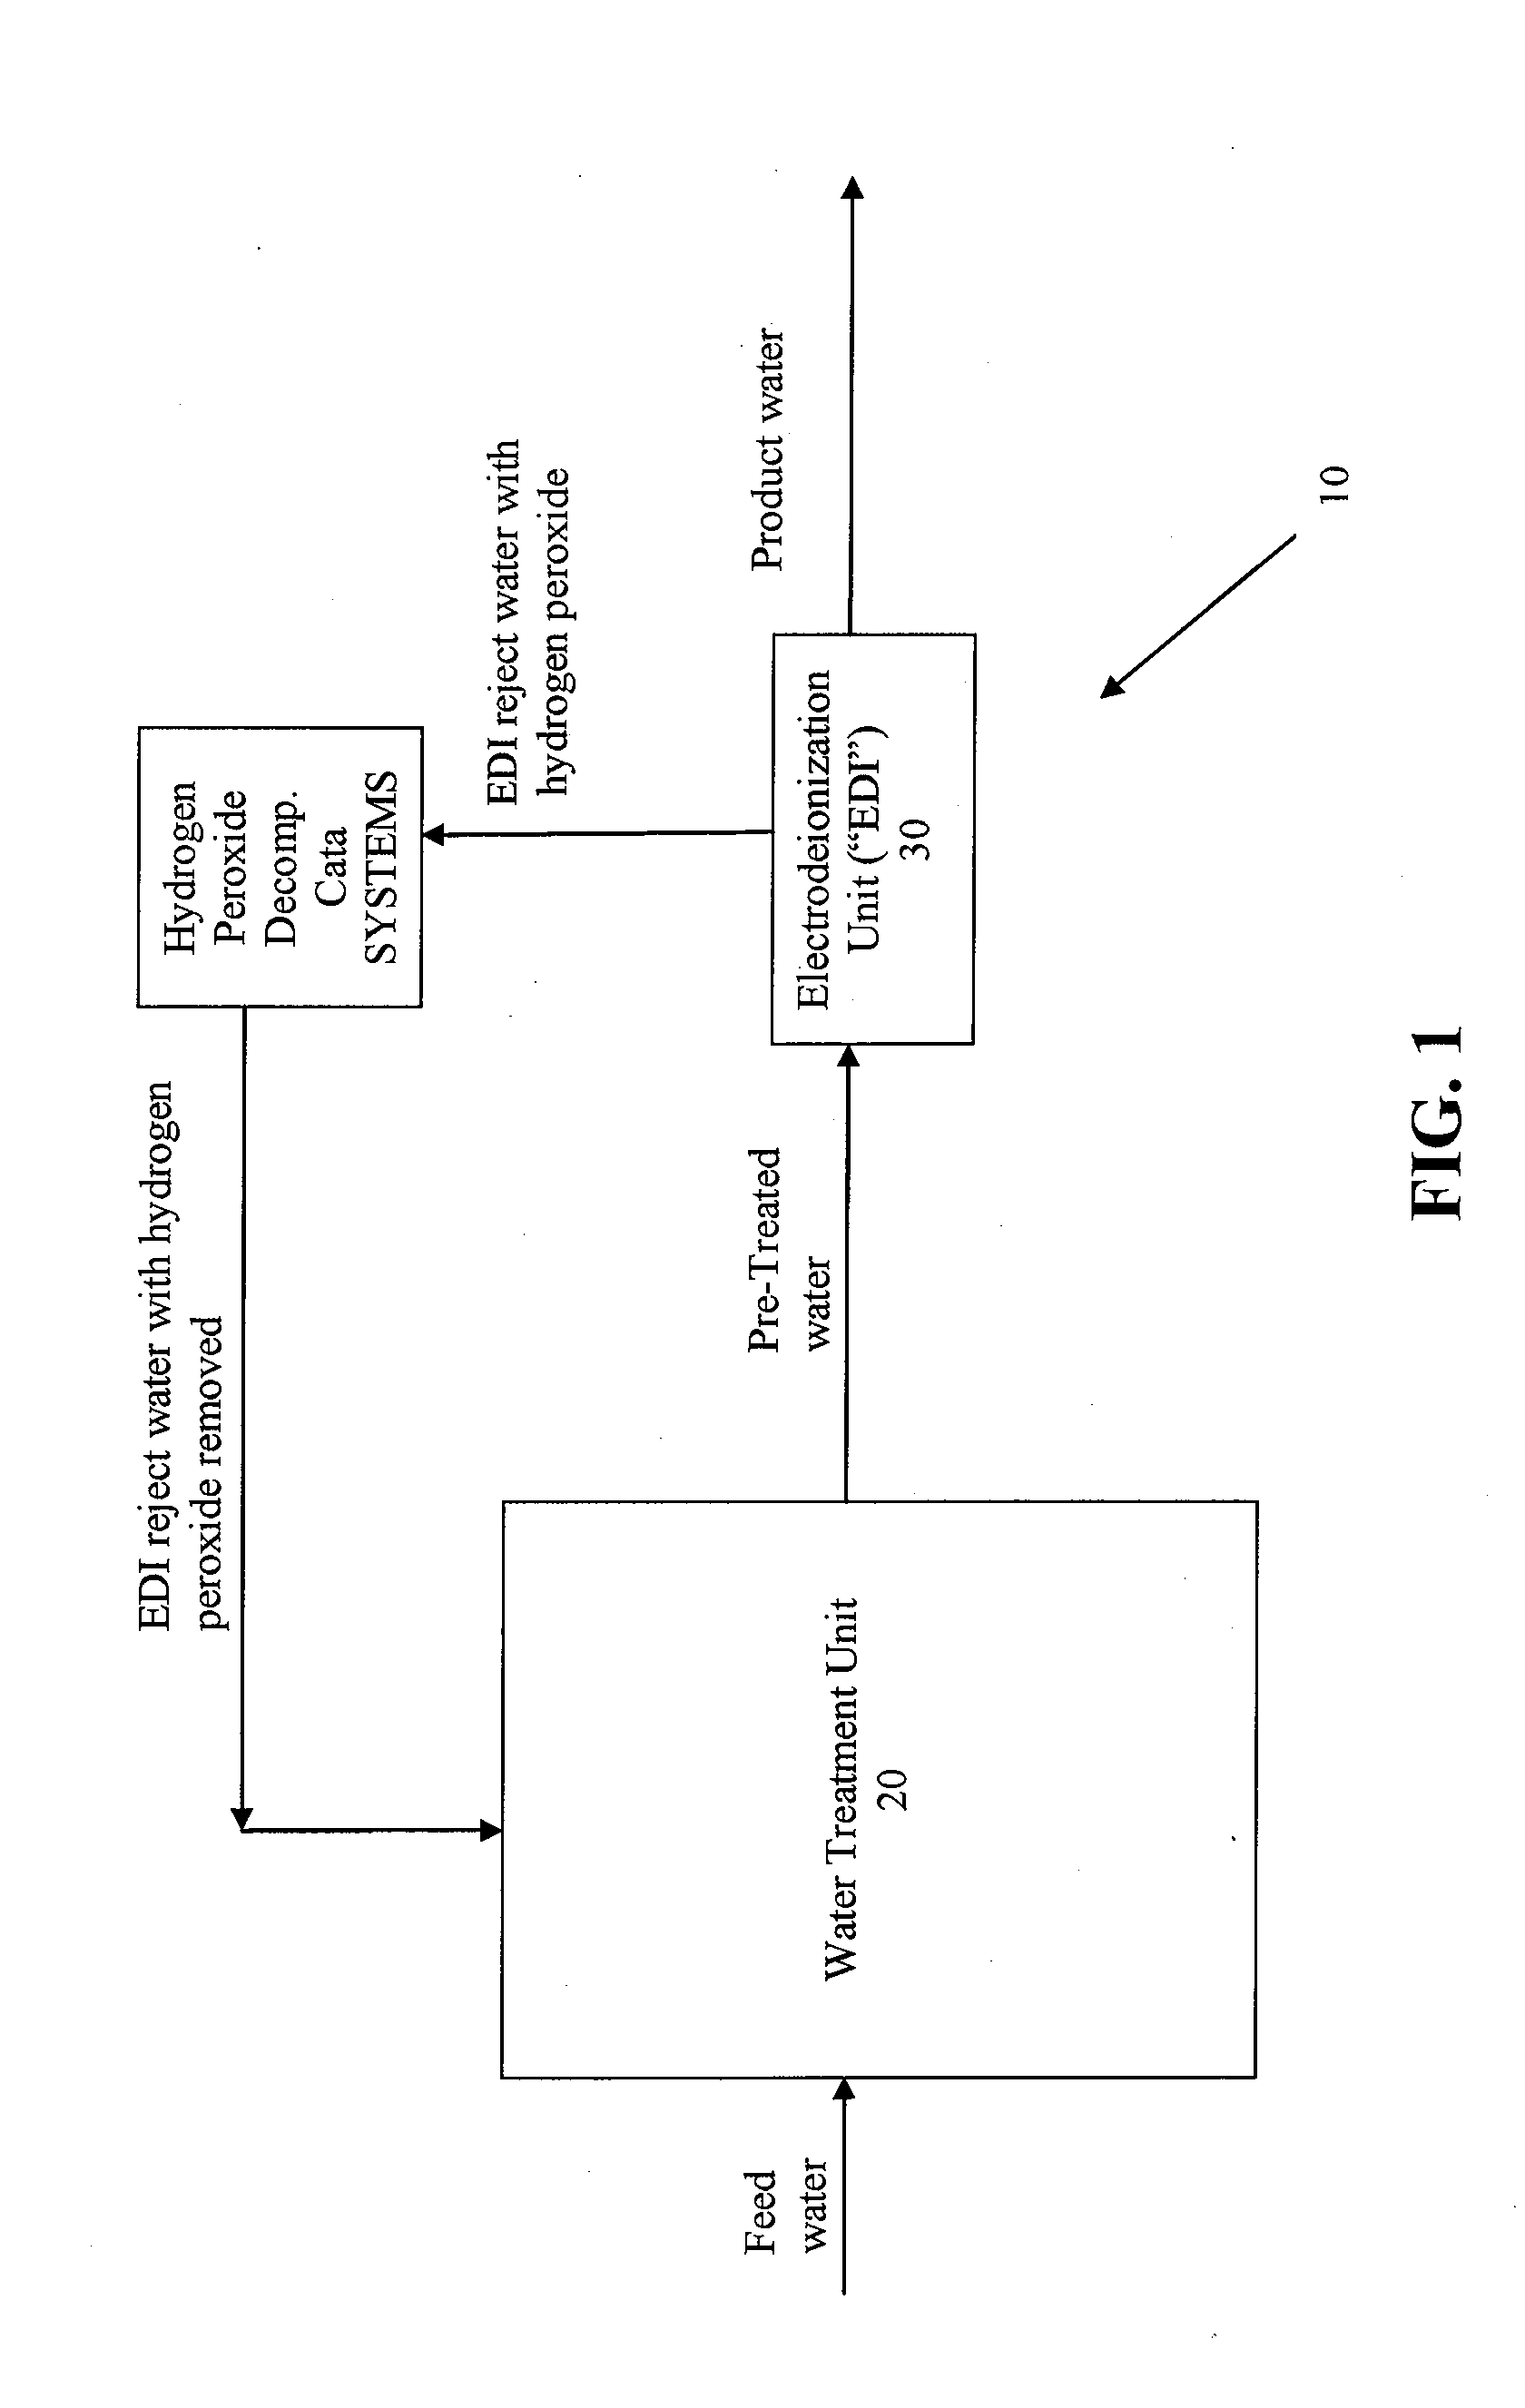 Systems and methods for removing hydrogen peroxide from water purification systems